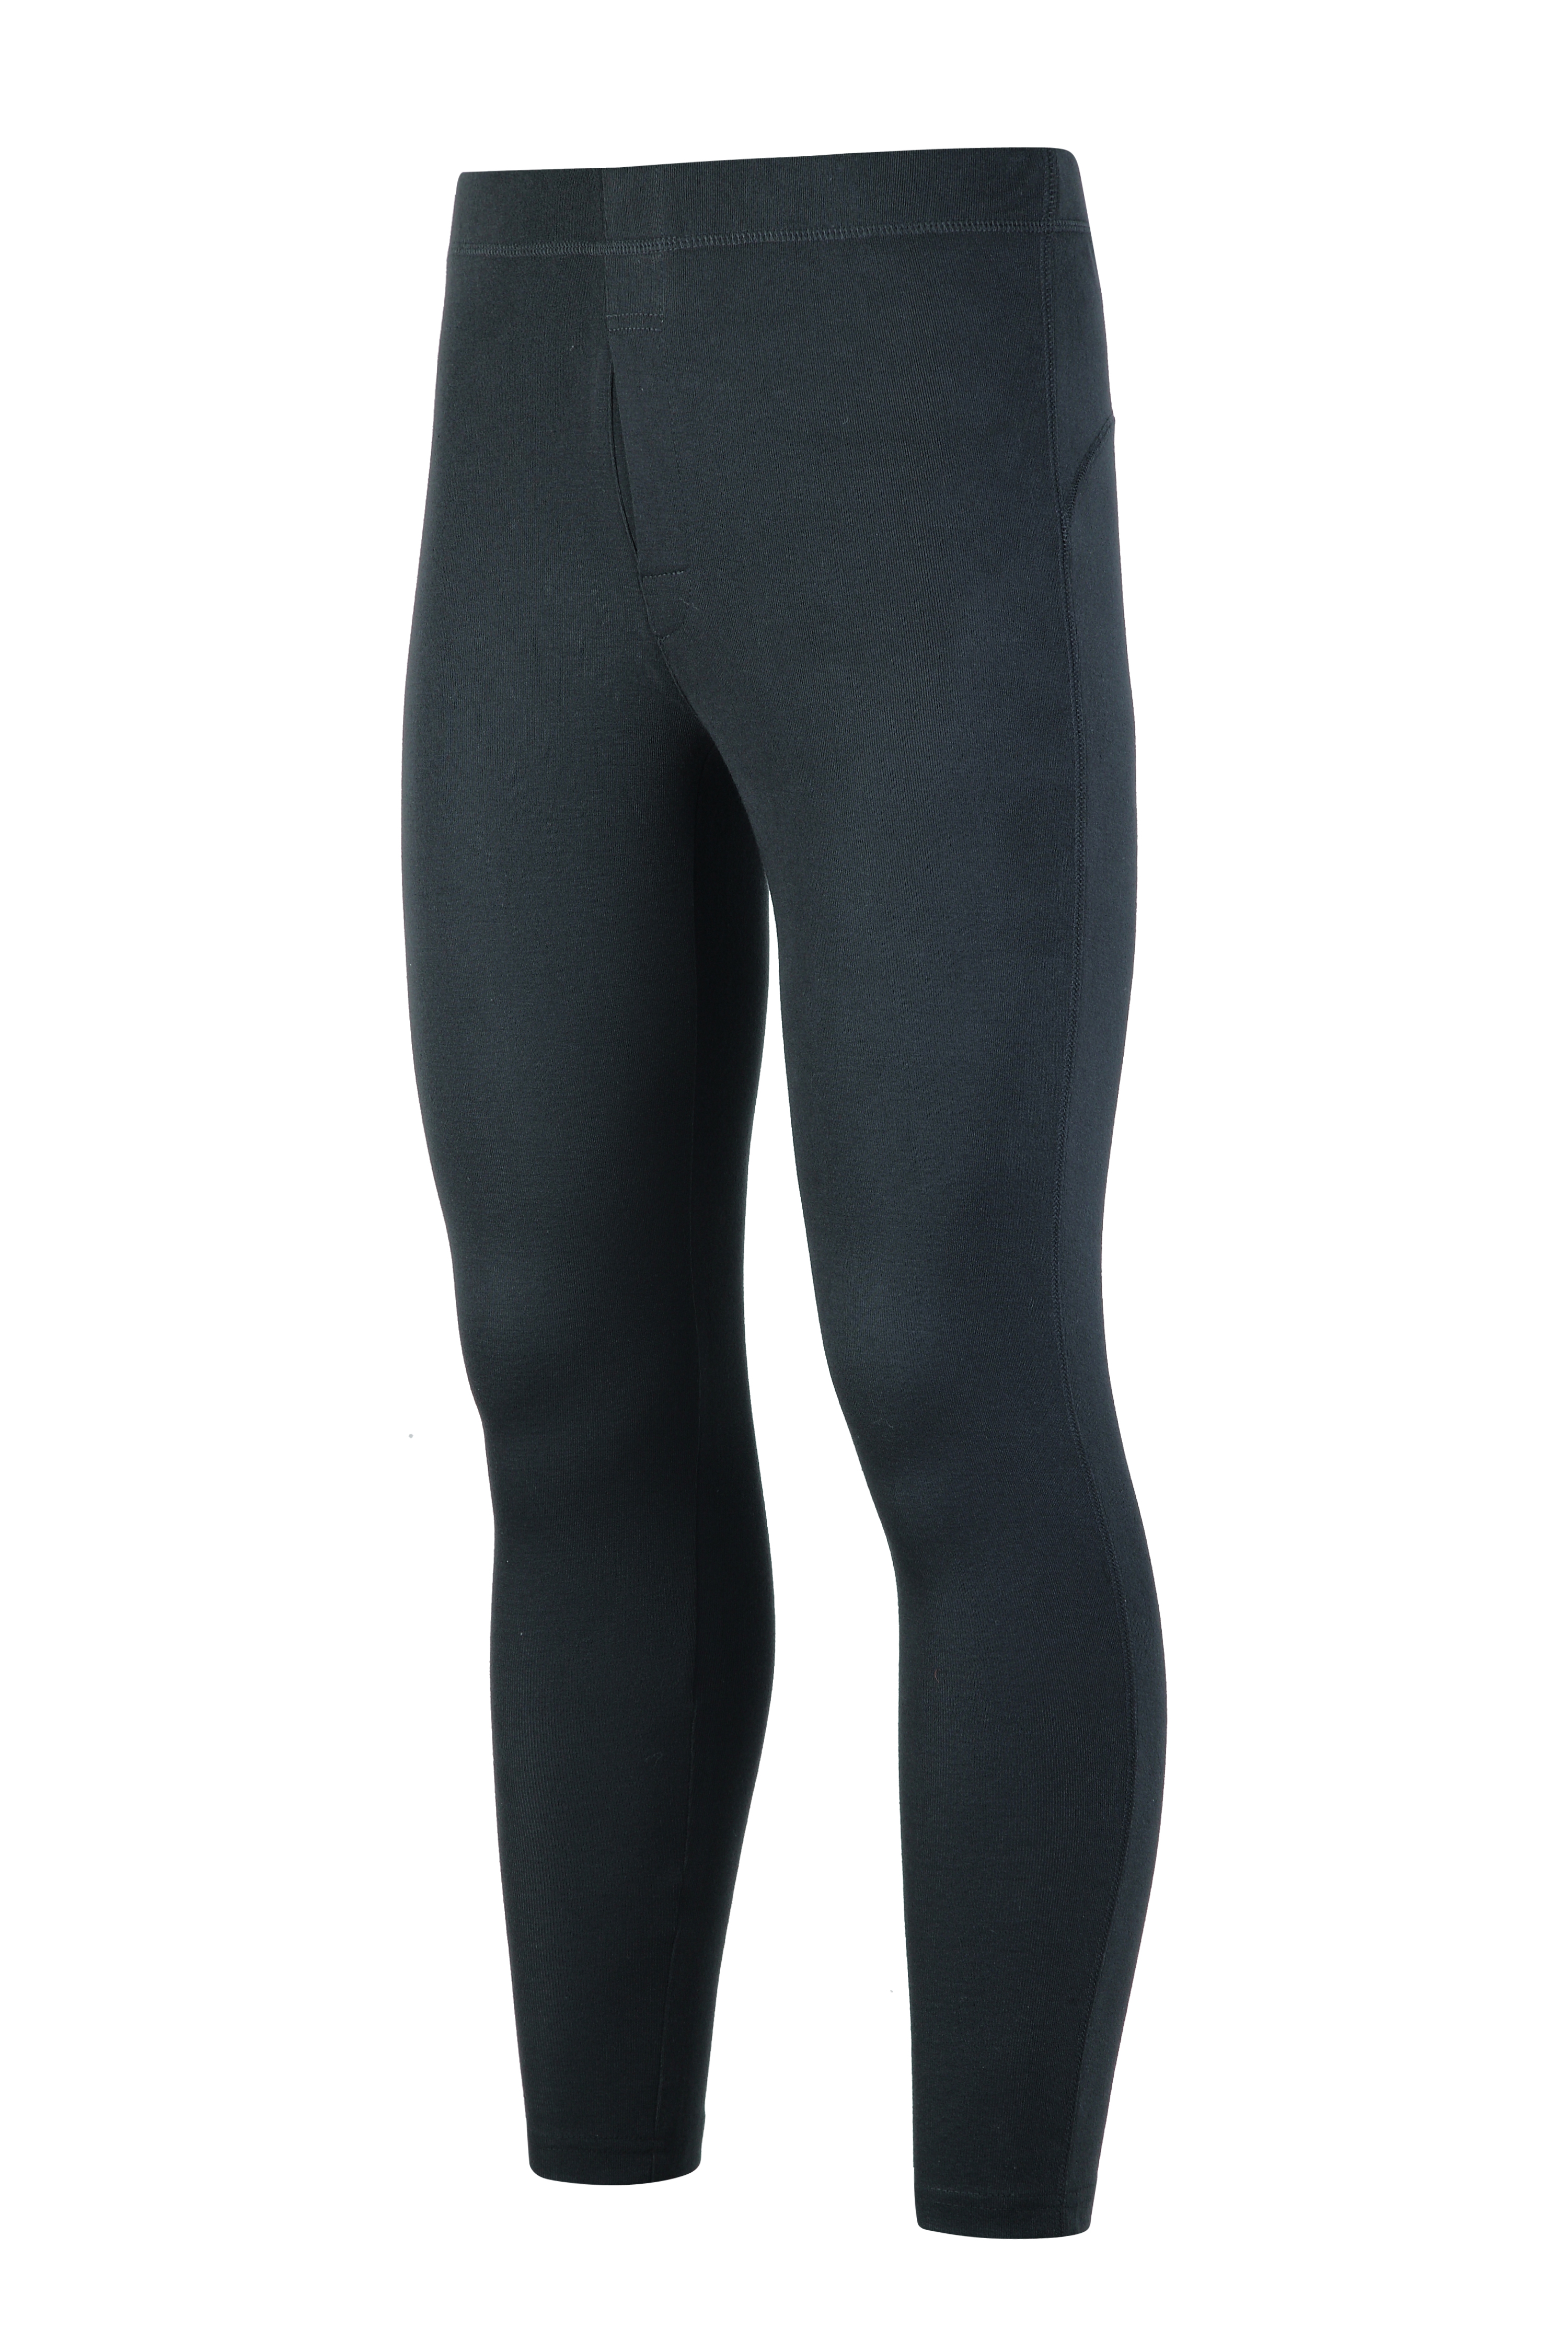 Men’s knitted compression pants.